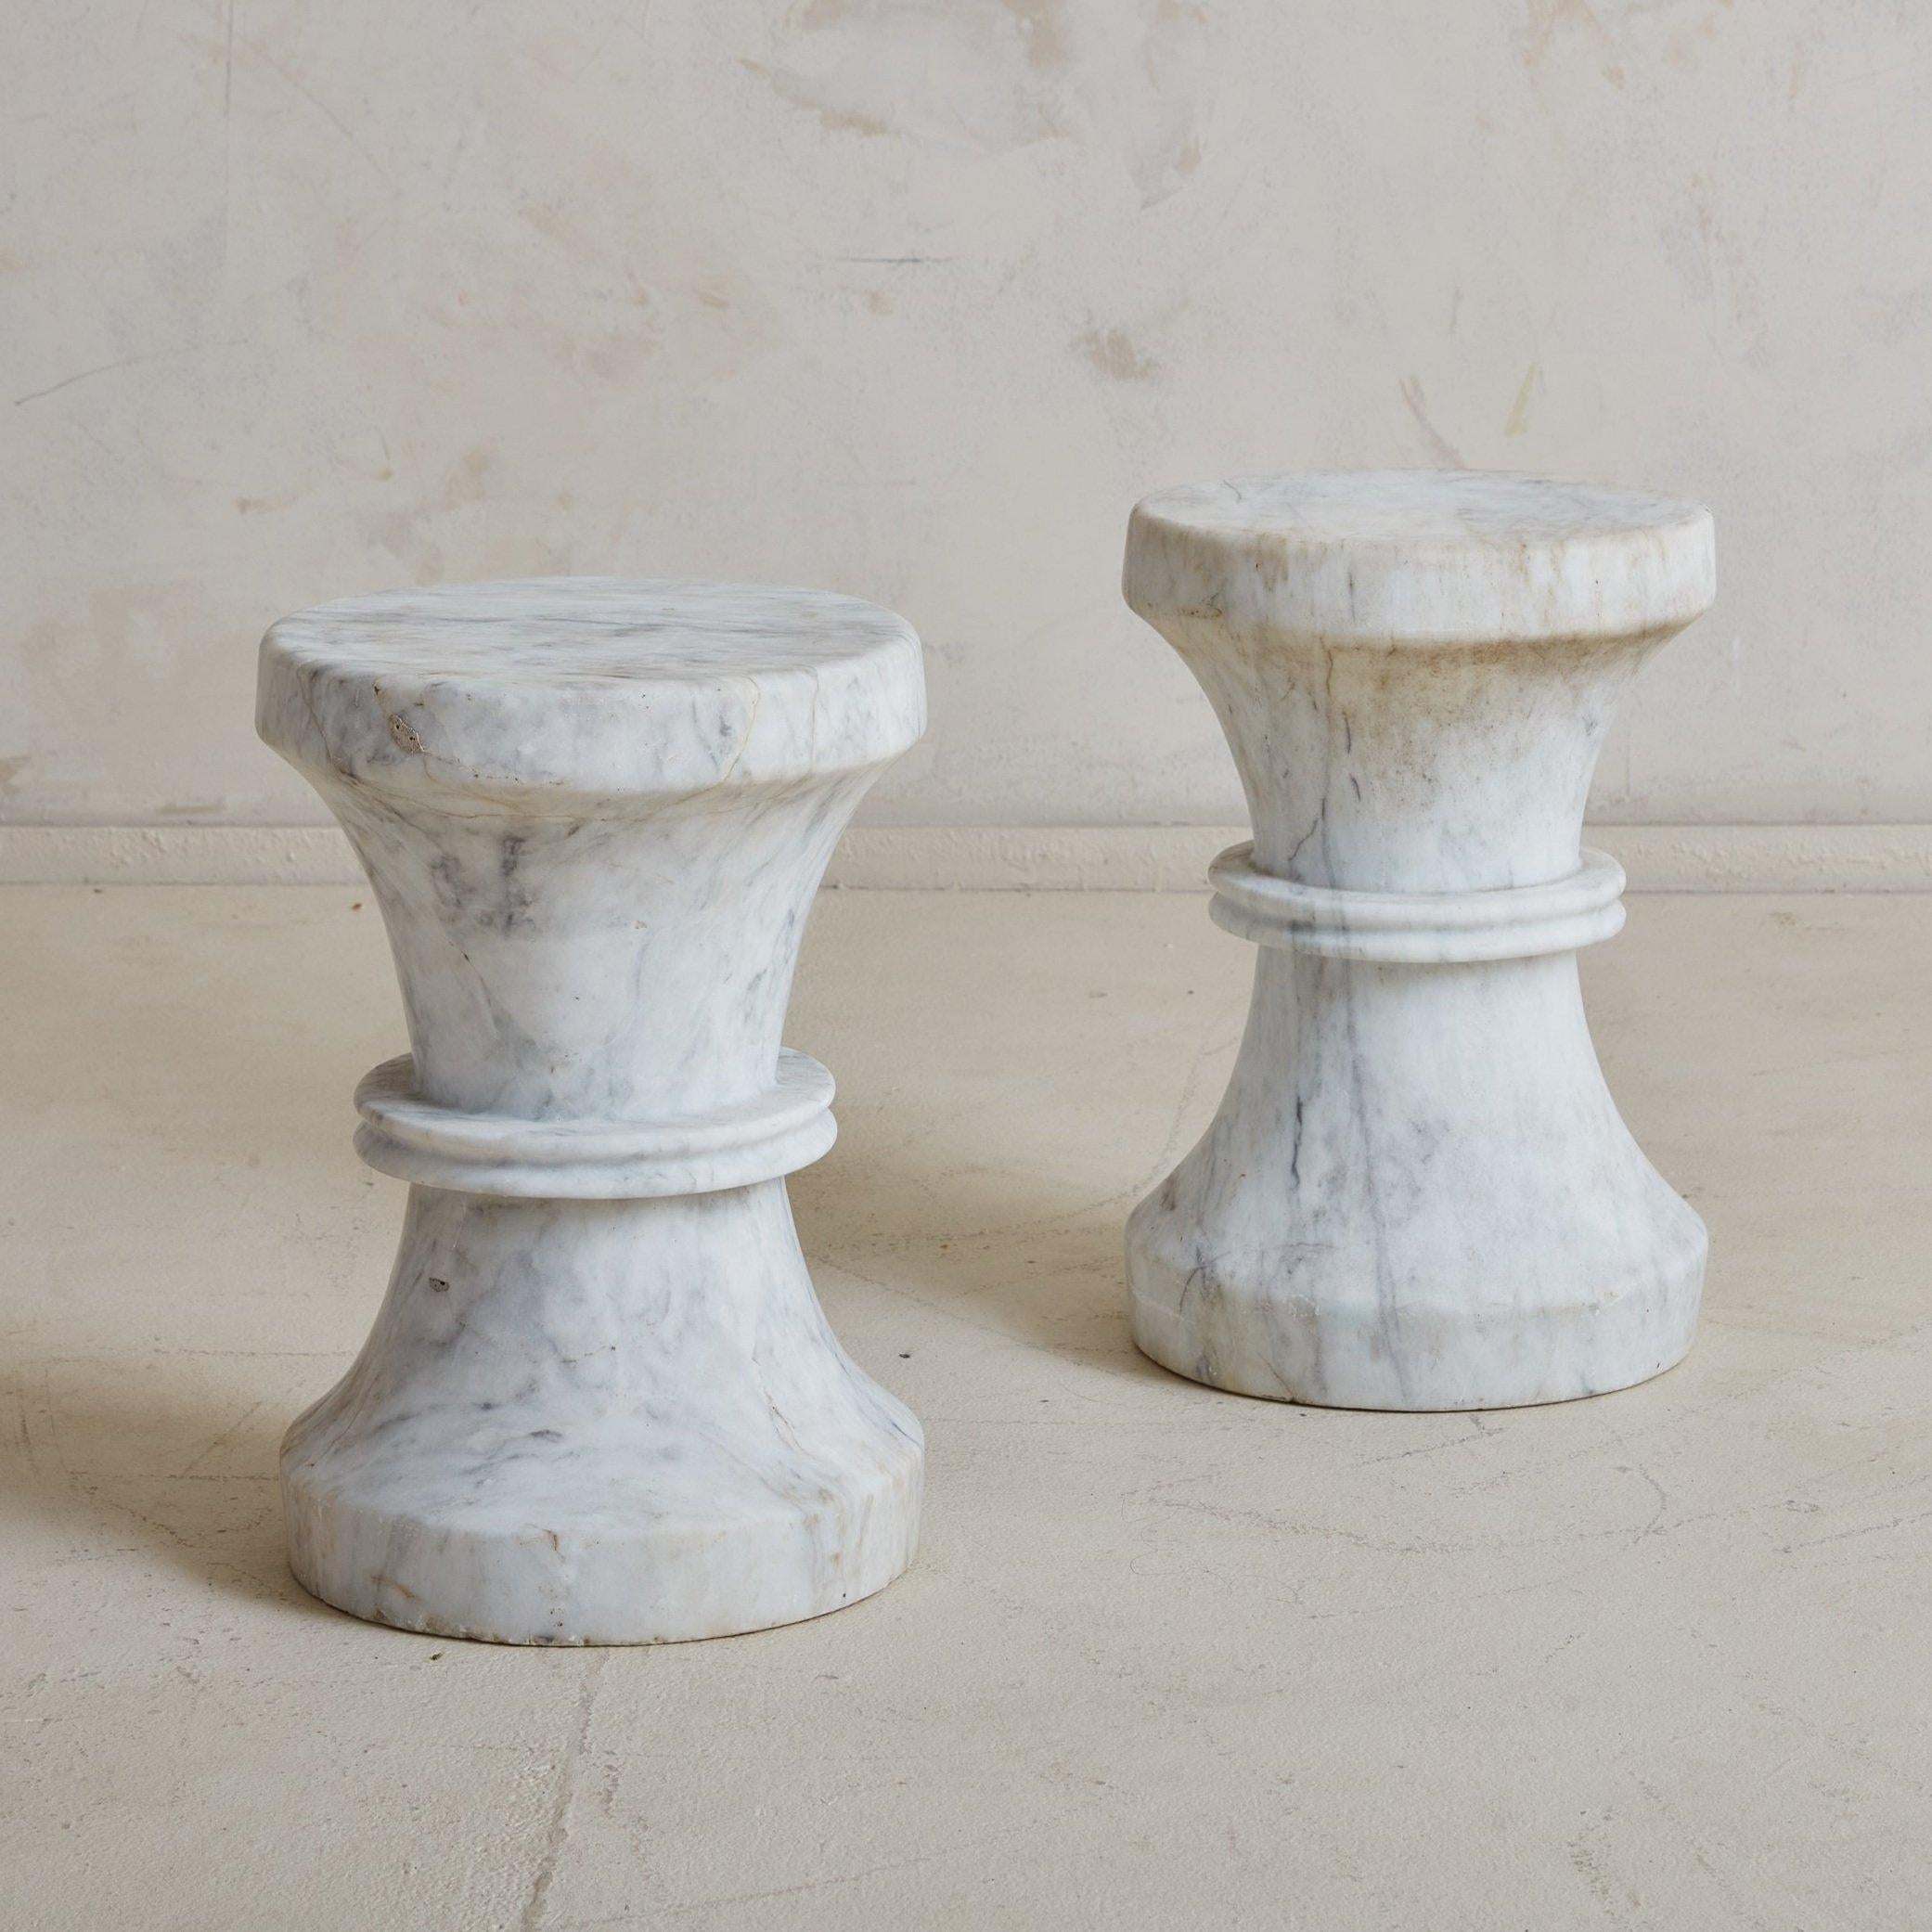 A 20th Century petite stool entirely crafted from solid white Italian Carrara marble. This Modern stool resembles a chess piece, displaying soft curves, ring details, and a round, flat base. The creamy white Carrara marble has stunning veining in